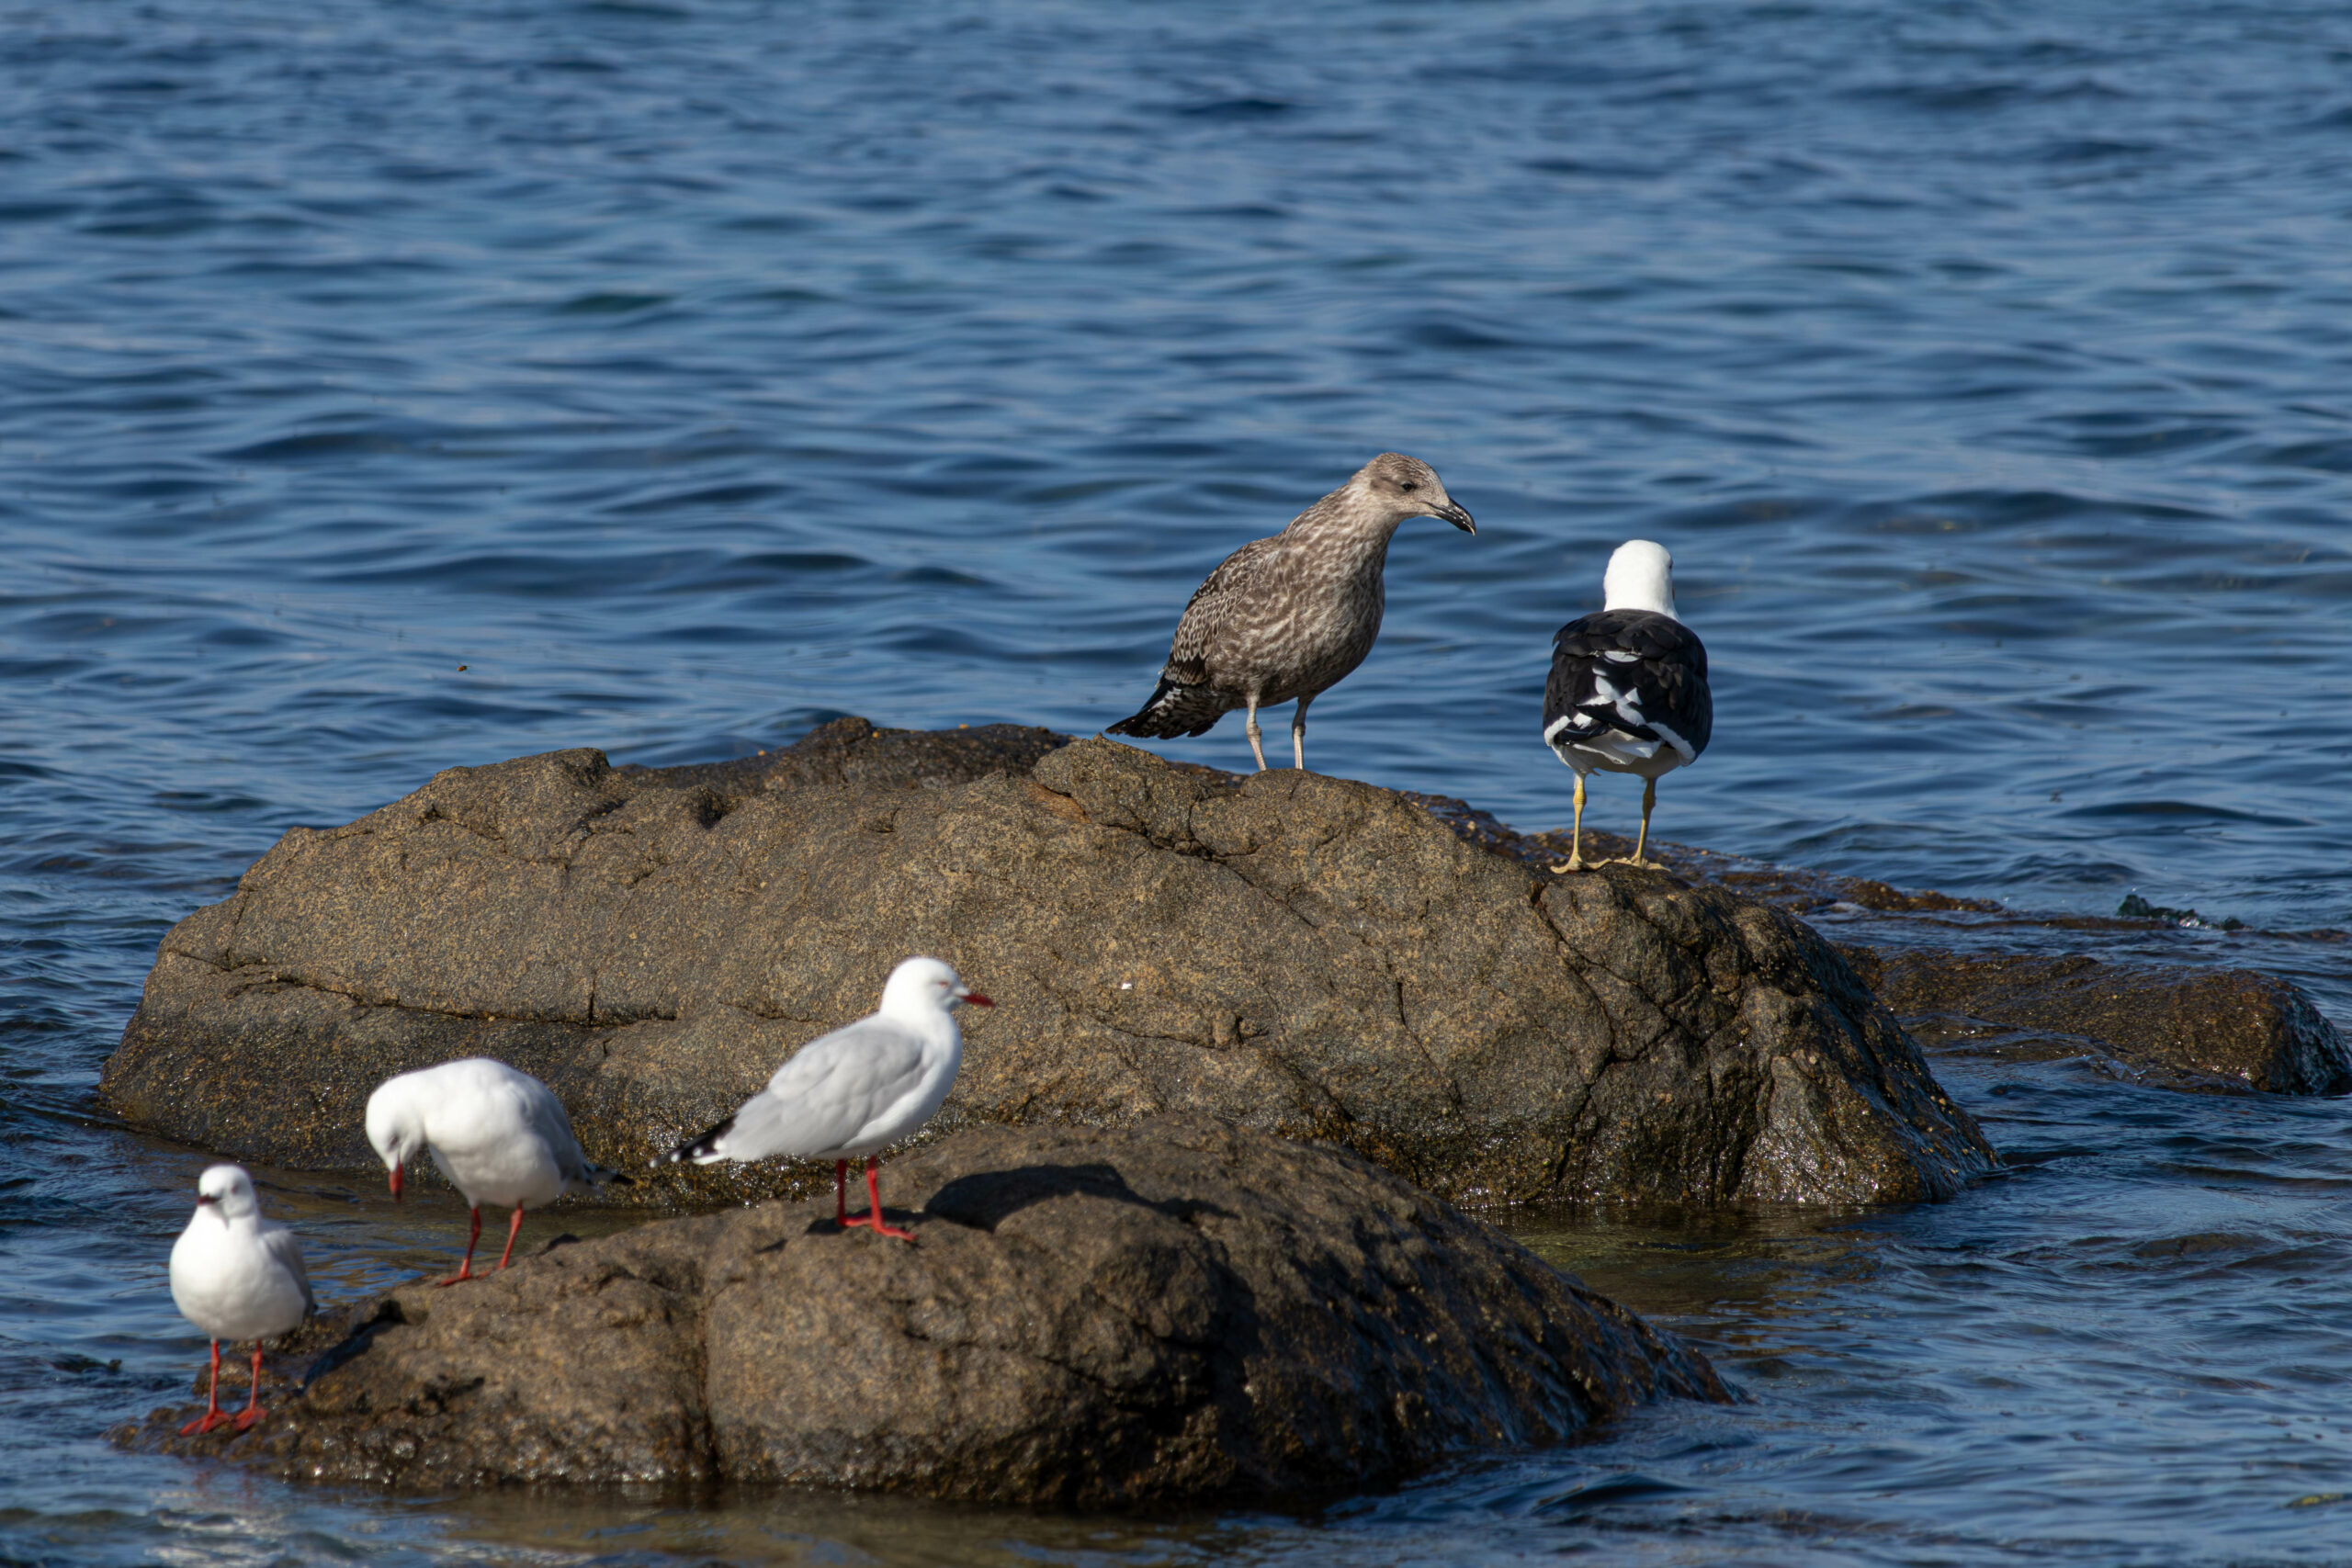 An adult and juvenile kelp gull standing on a rock in the water. The juvenile is brown; the adult has a white front and black back. There are three seagullls in the foreground